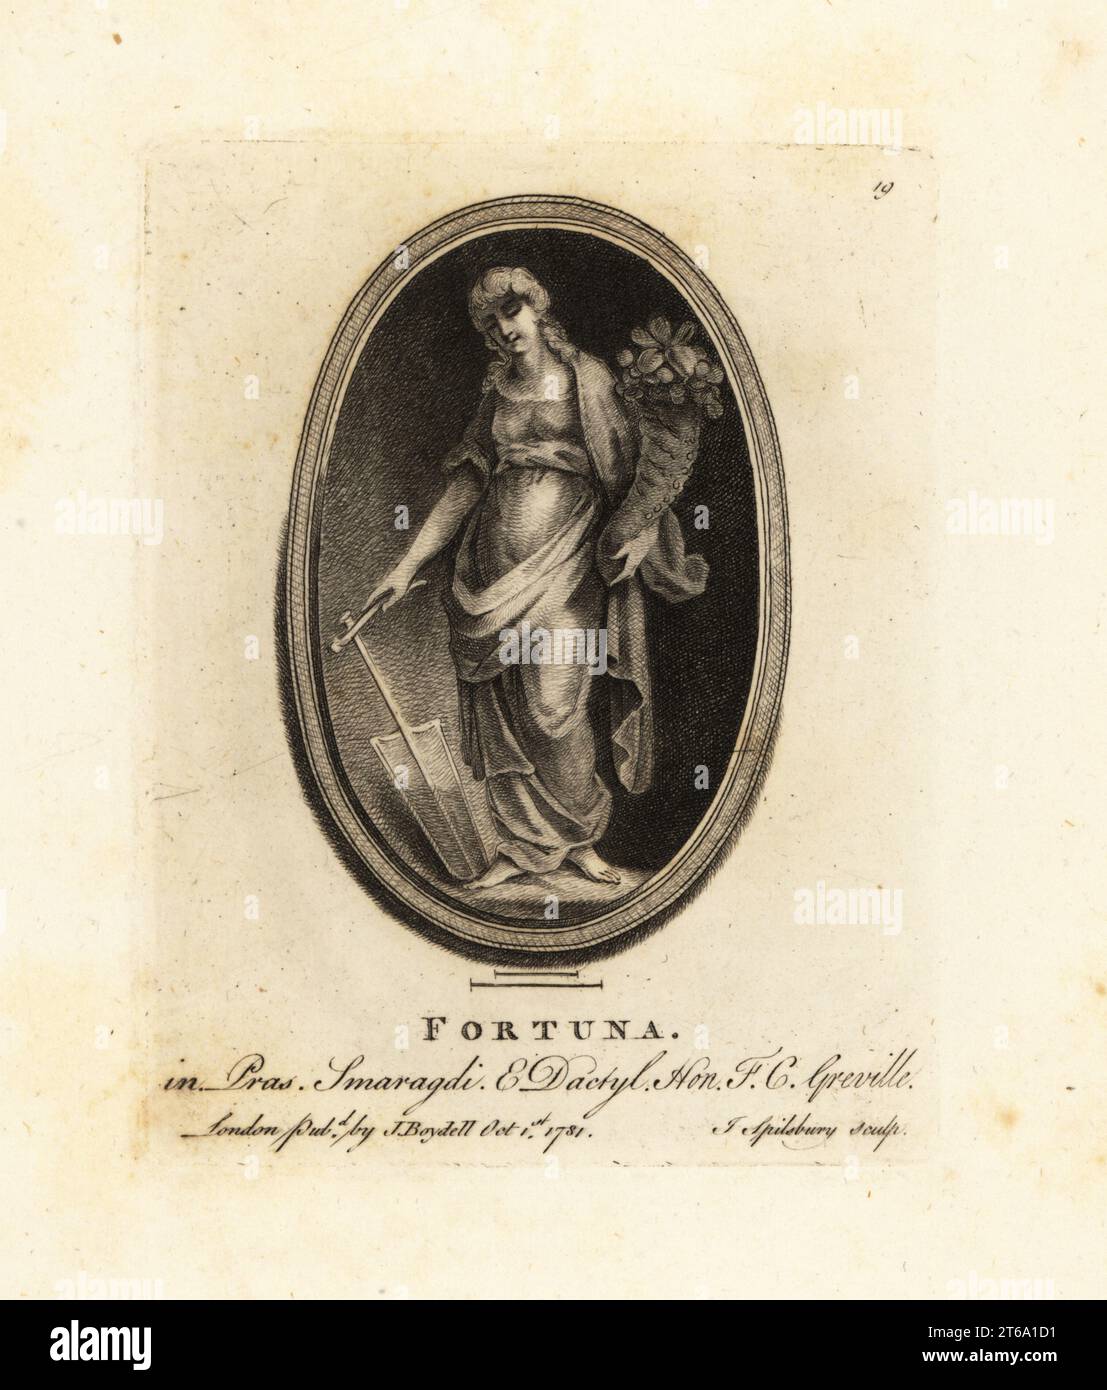 Figure of Fortuna, the goddess of fortune and the personification of luck in Roman religion. With cornucopia and gubernaculum or ship's rudder. On emerald and dactylotheca. From the collection of the antiquarian Charles Francis Greville. Mezzotint copperplate engraving by John Spilsbury from his Collection of Fifty Prints from Antique Gems, John Boydell, London, 1785. Stock Photo